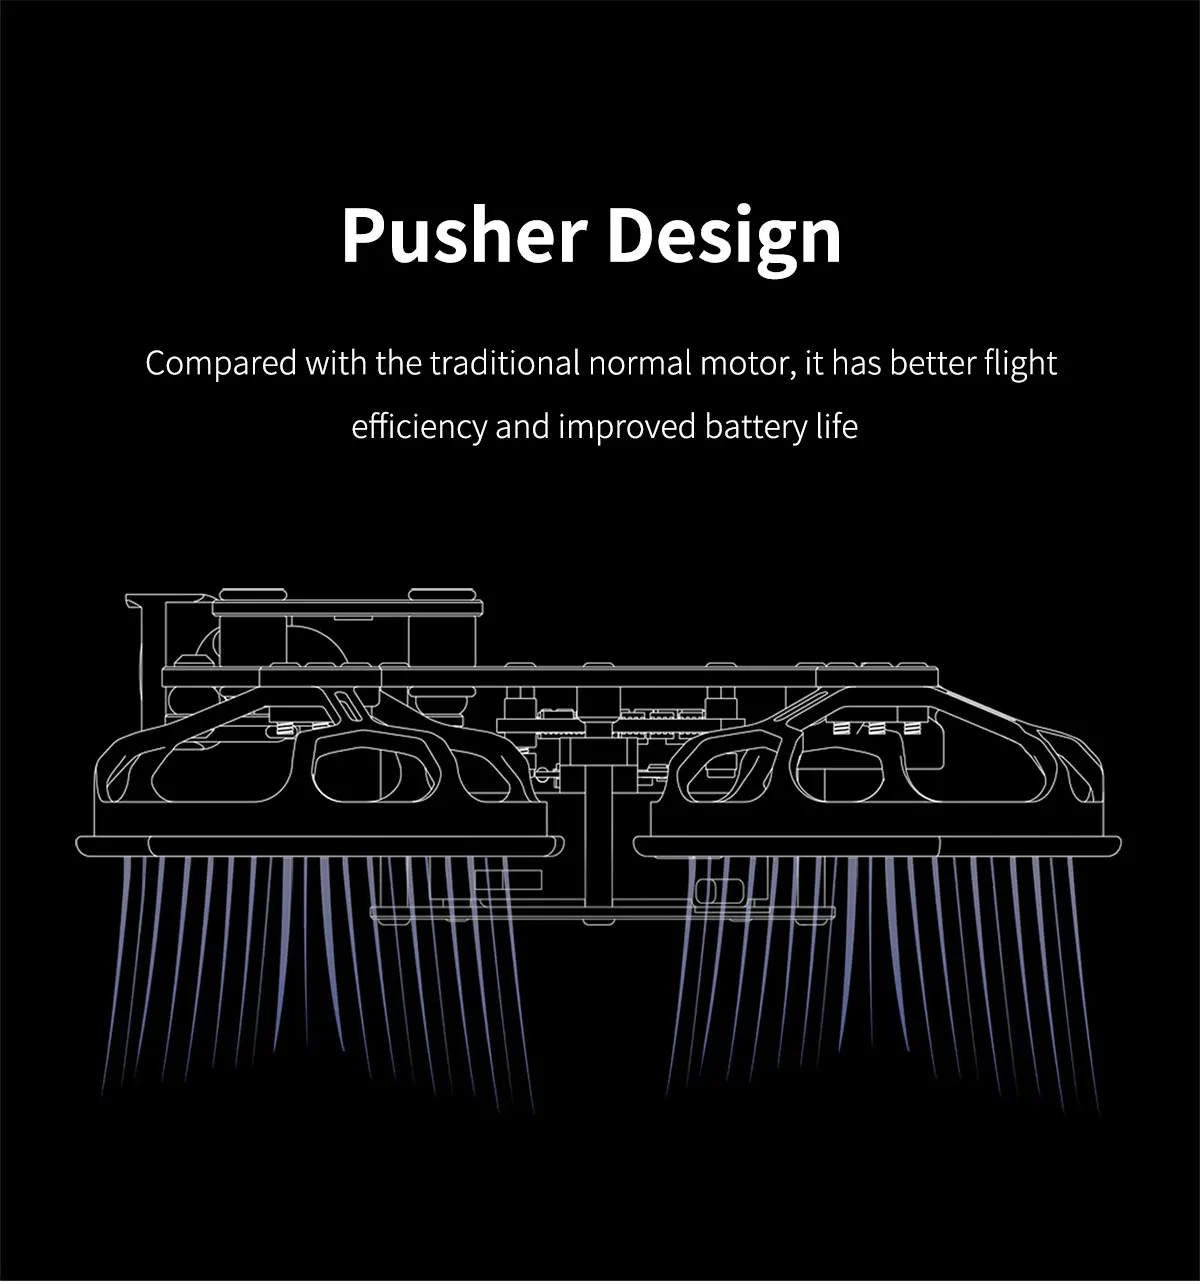 GEPRC Cinelog20 HD, Pusher Design Compared with the traditional normal motor, it has better flight efficiency and improved battery